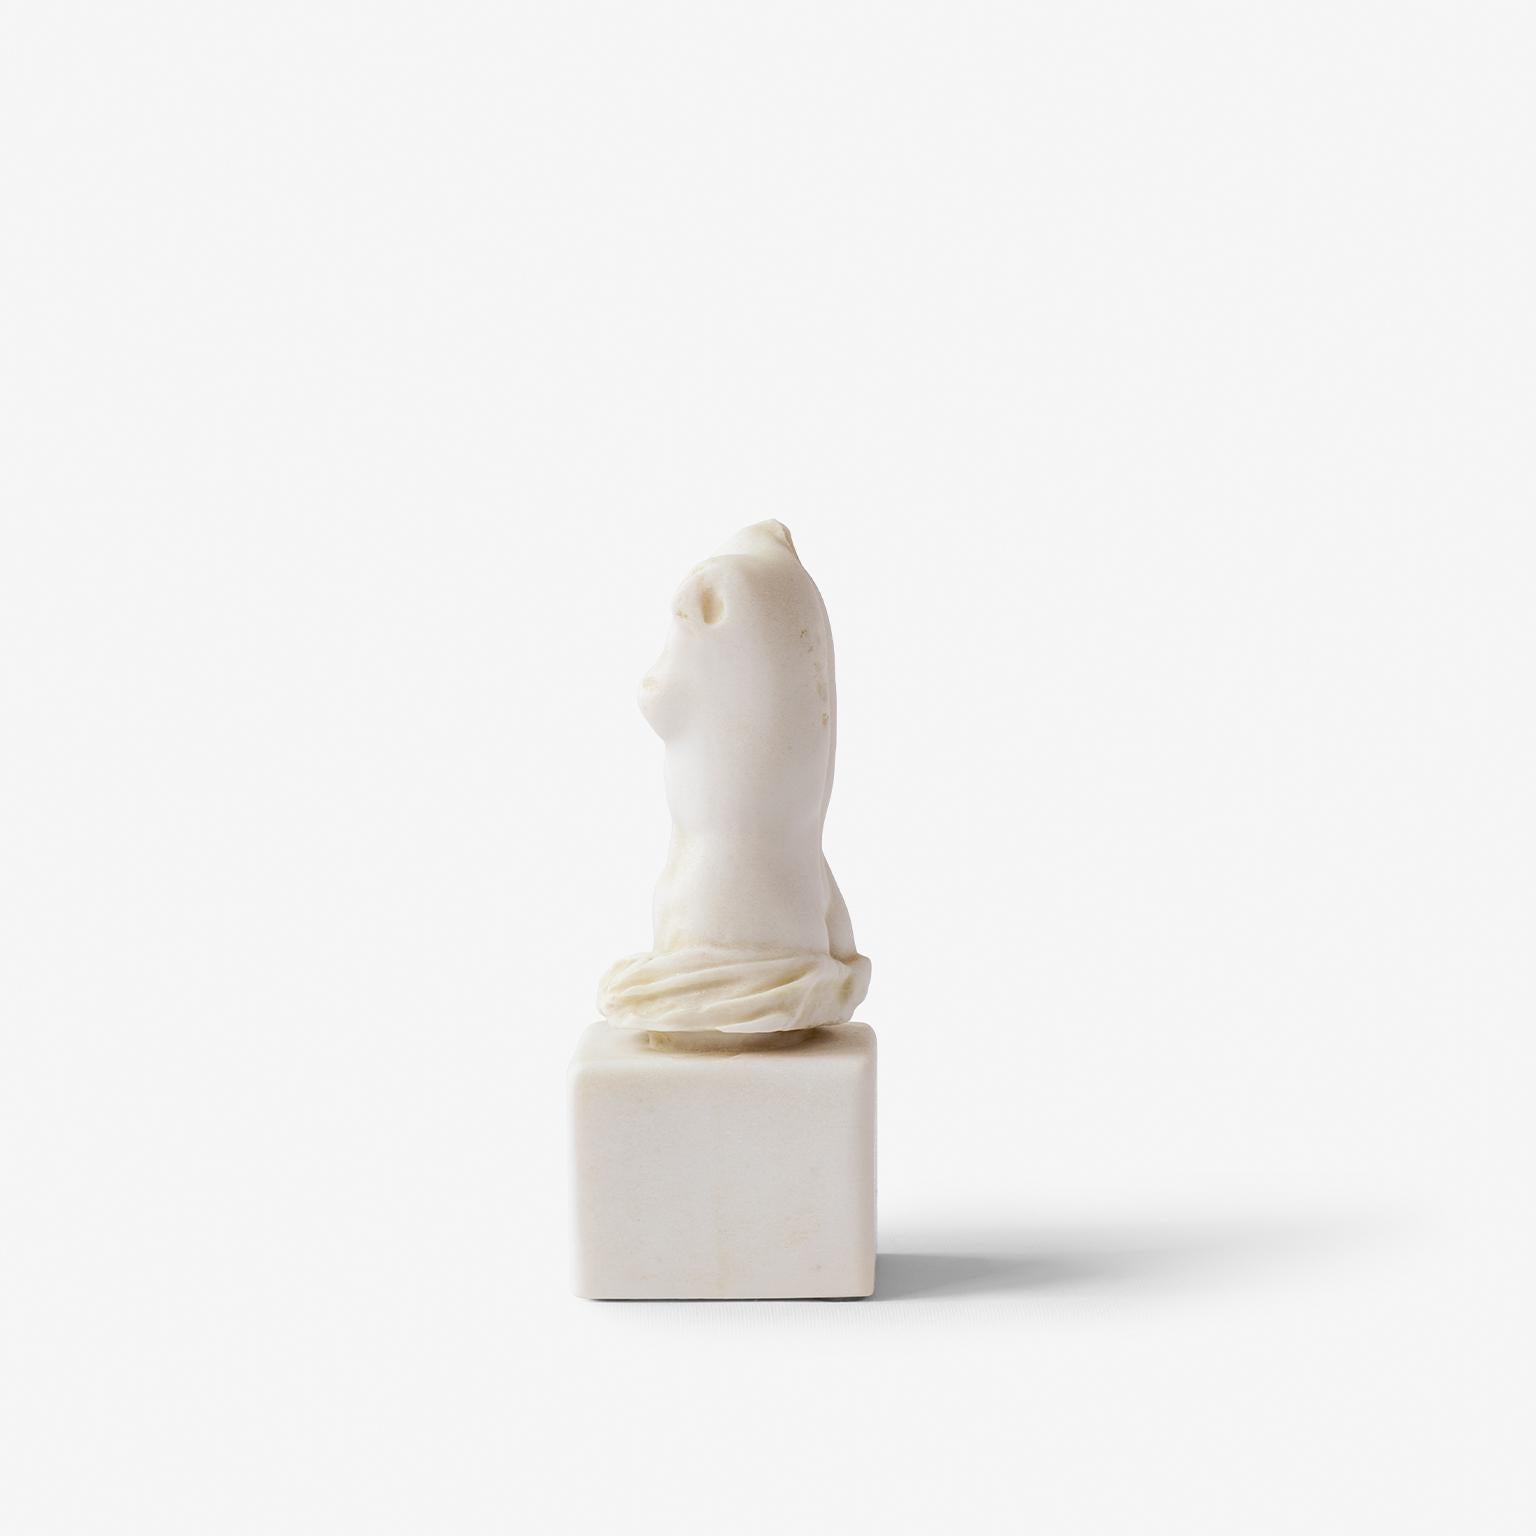 Measures: Height: 5.9'' / Weight: 800 gr

This is a work that symbolizes the depiction of the ideal female form.

-Produced from pressed marble powder.
-Produced from the original molds of the works from the museum.
-Can be used indoors and